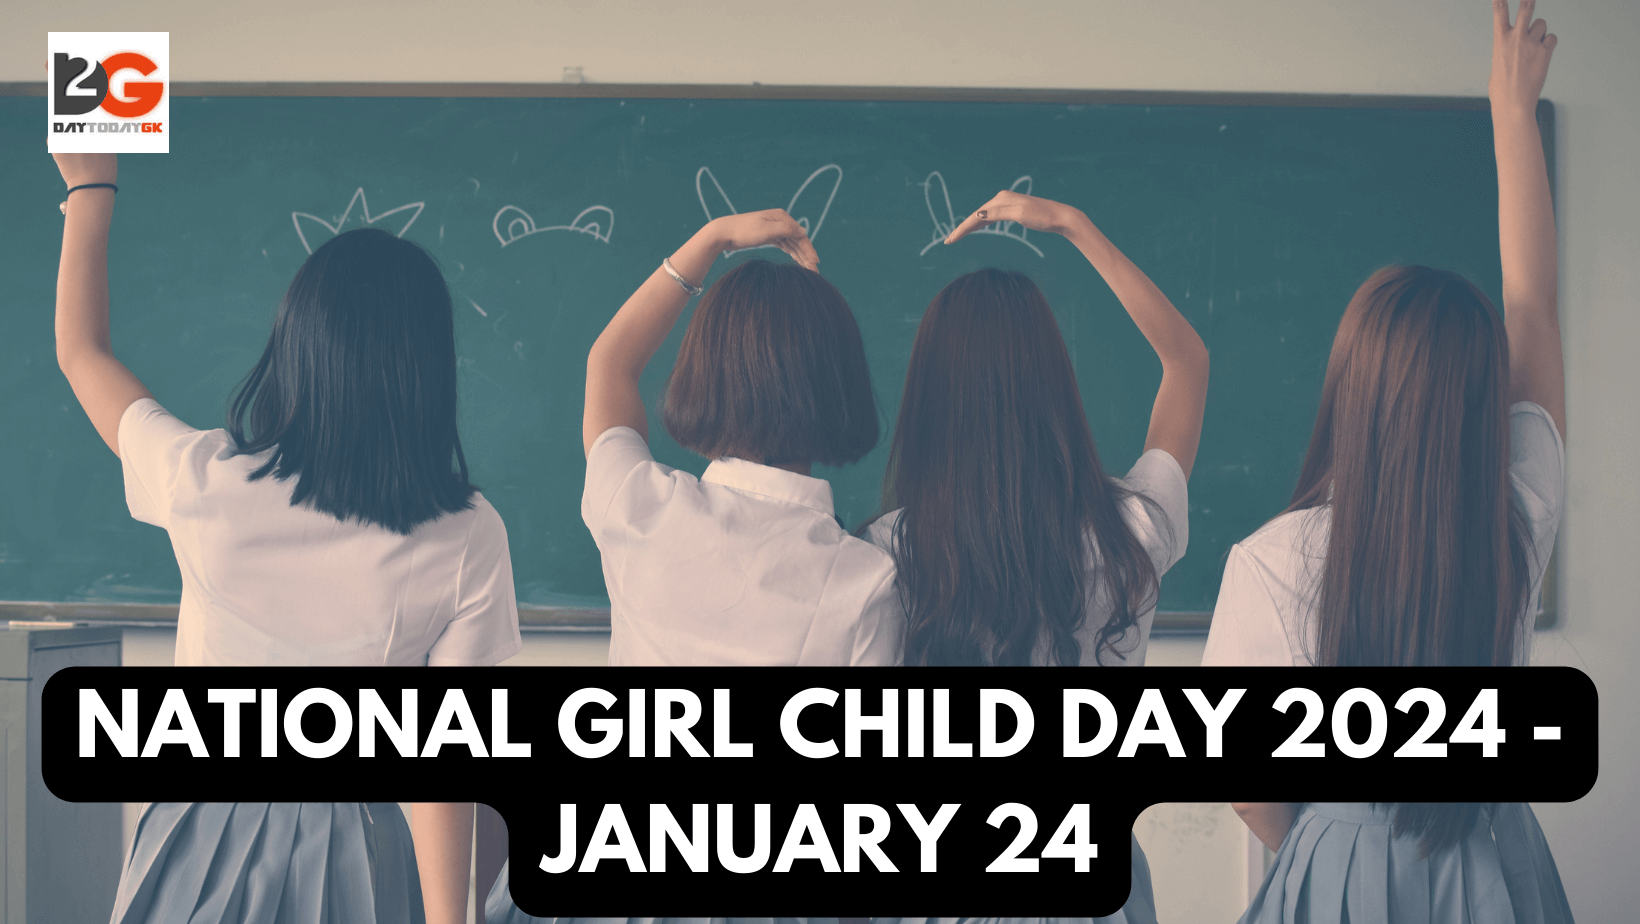 National Girl Child Day 2024 is observed on January 24